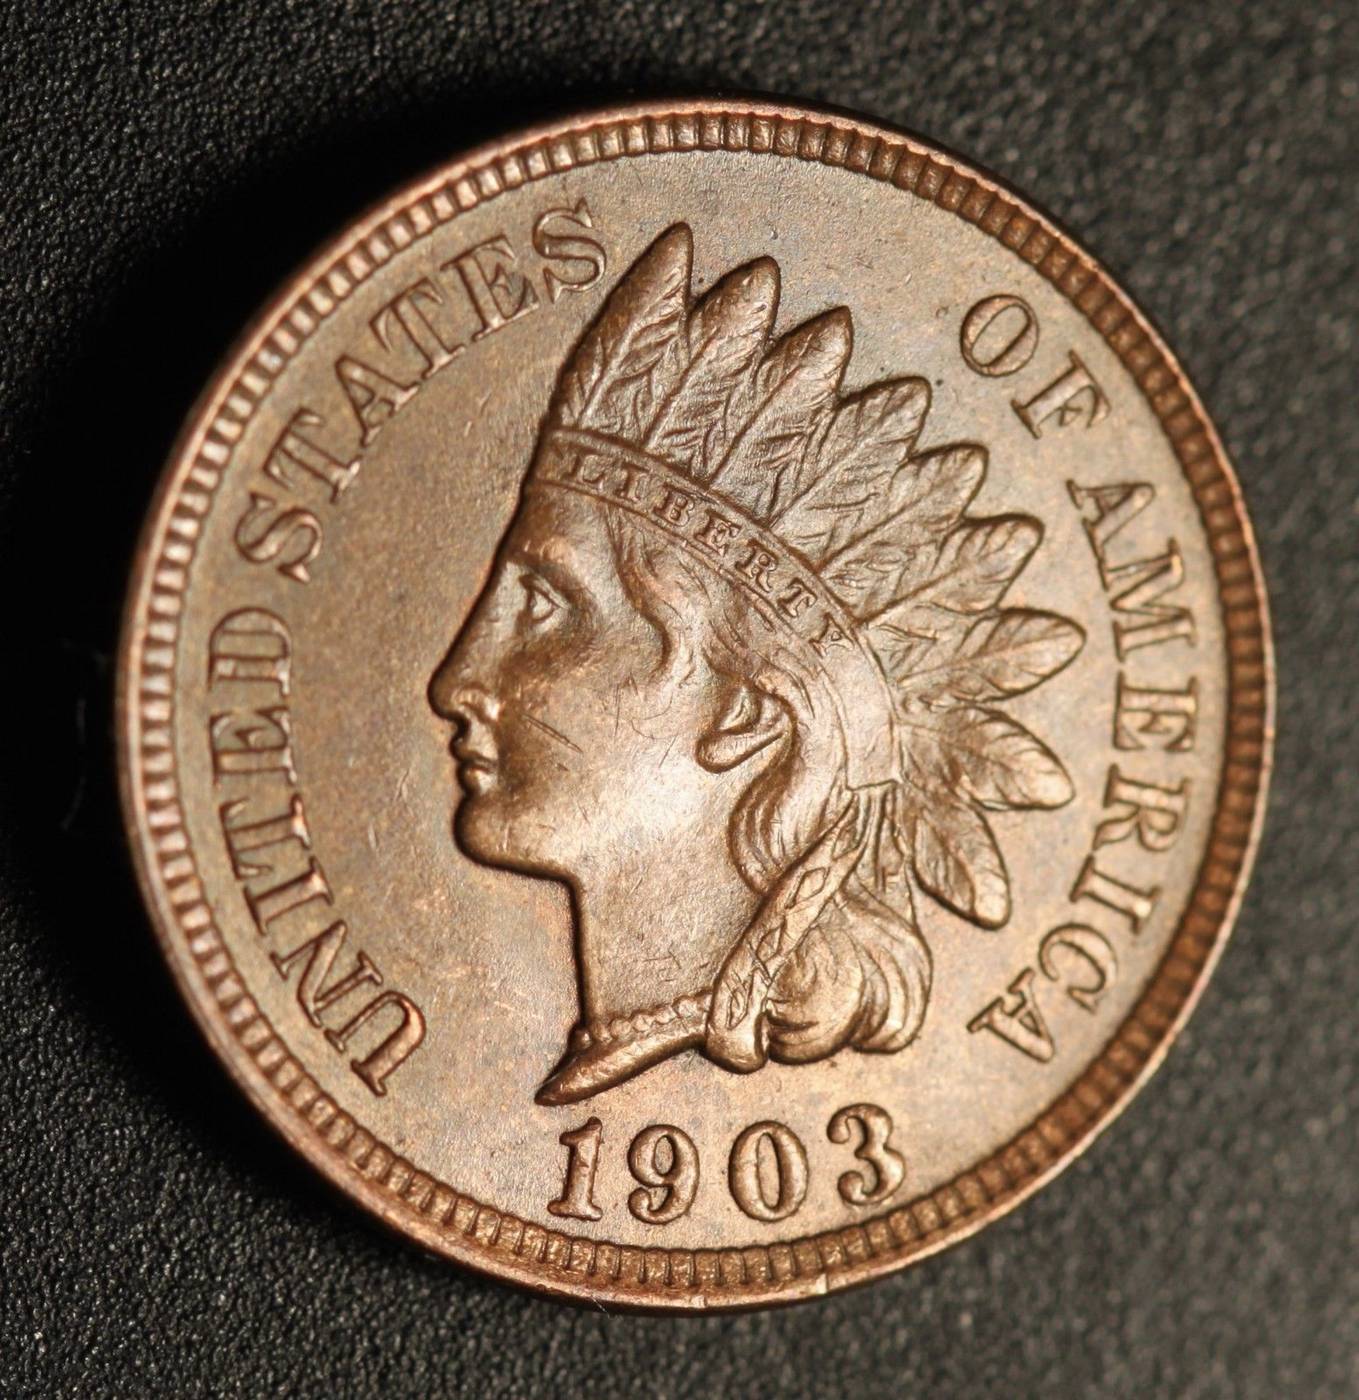 1903 RPD-004 - Indian Head Penny - Photo by Ed Nathanson